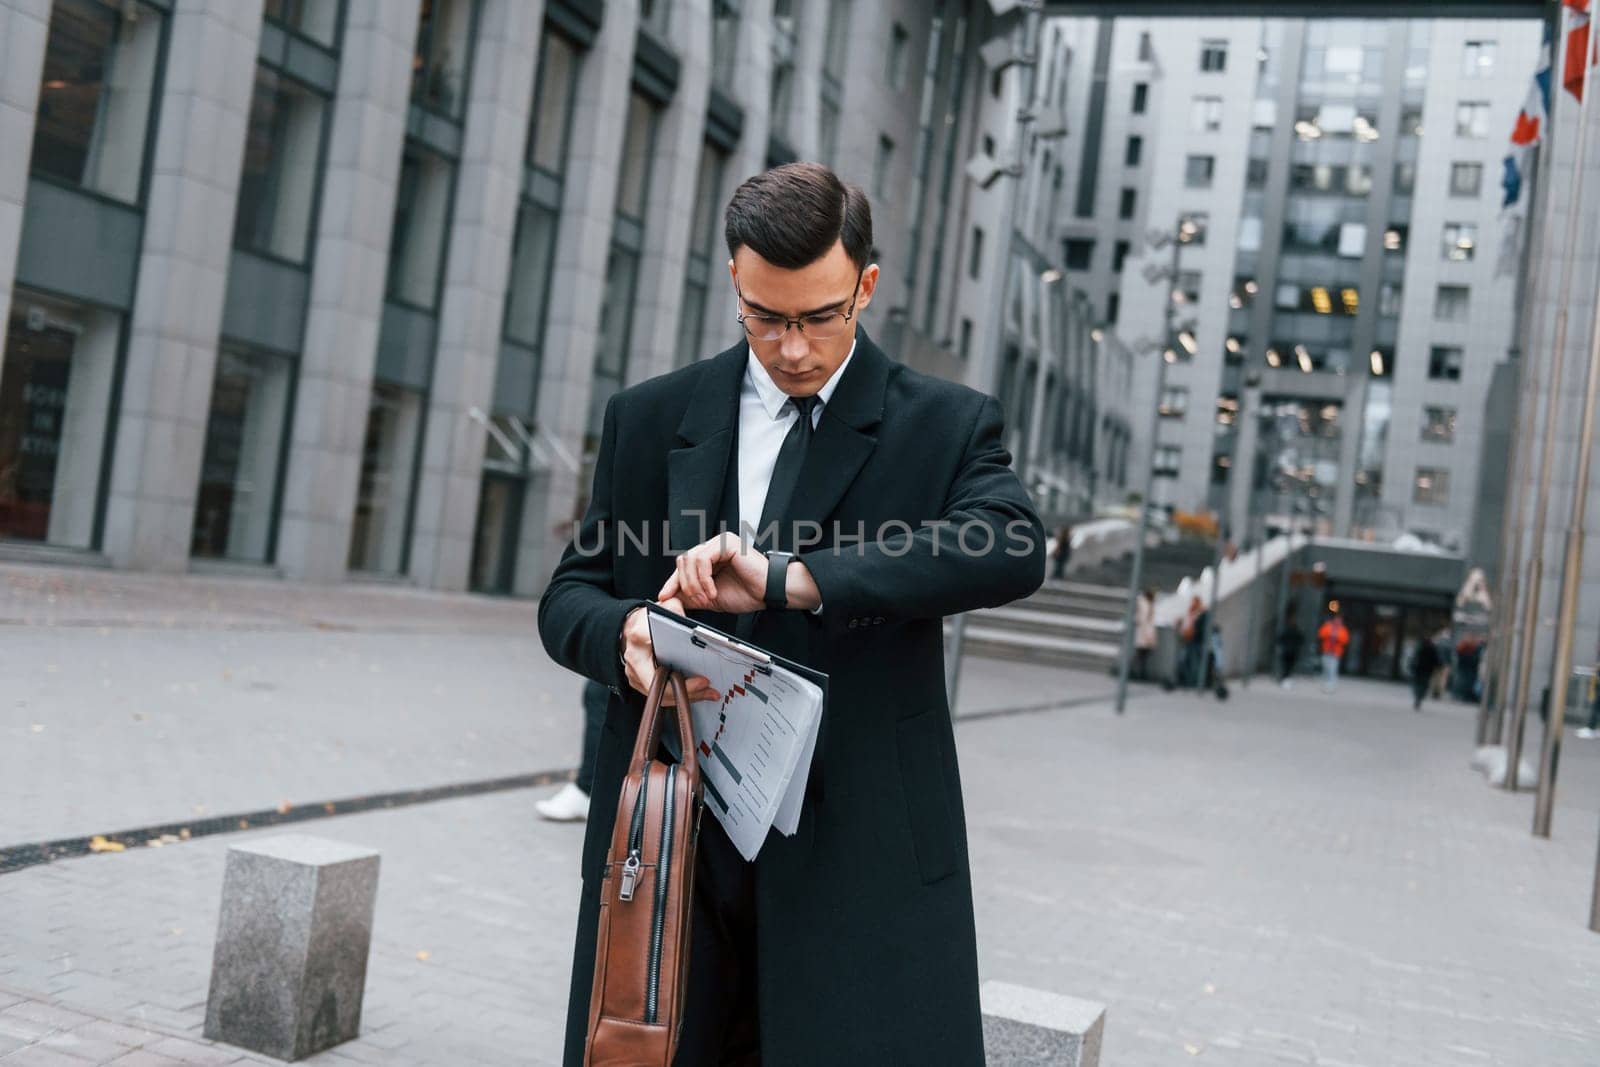 Busy for a work. Businessman in black suit and tie is outdoors in the city.